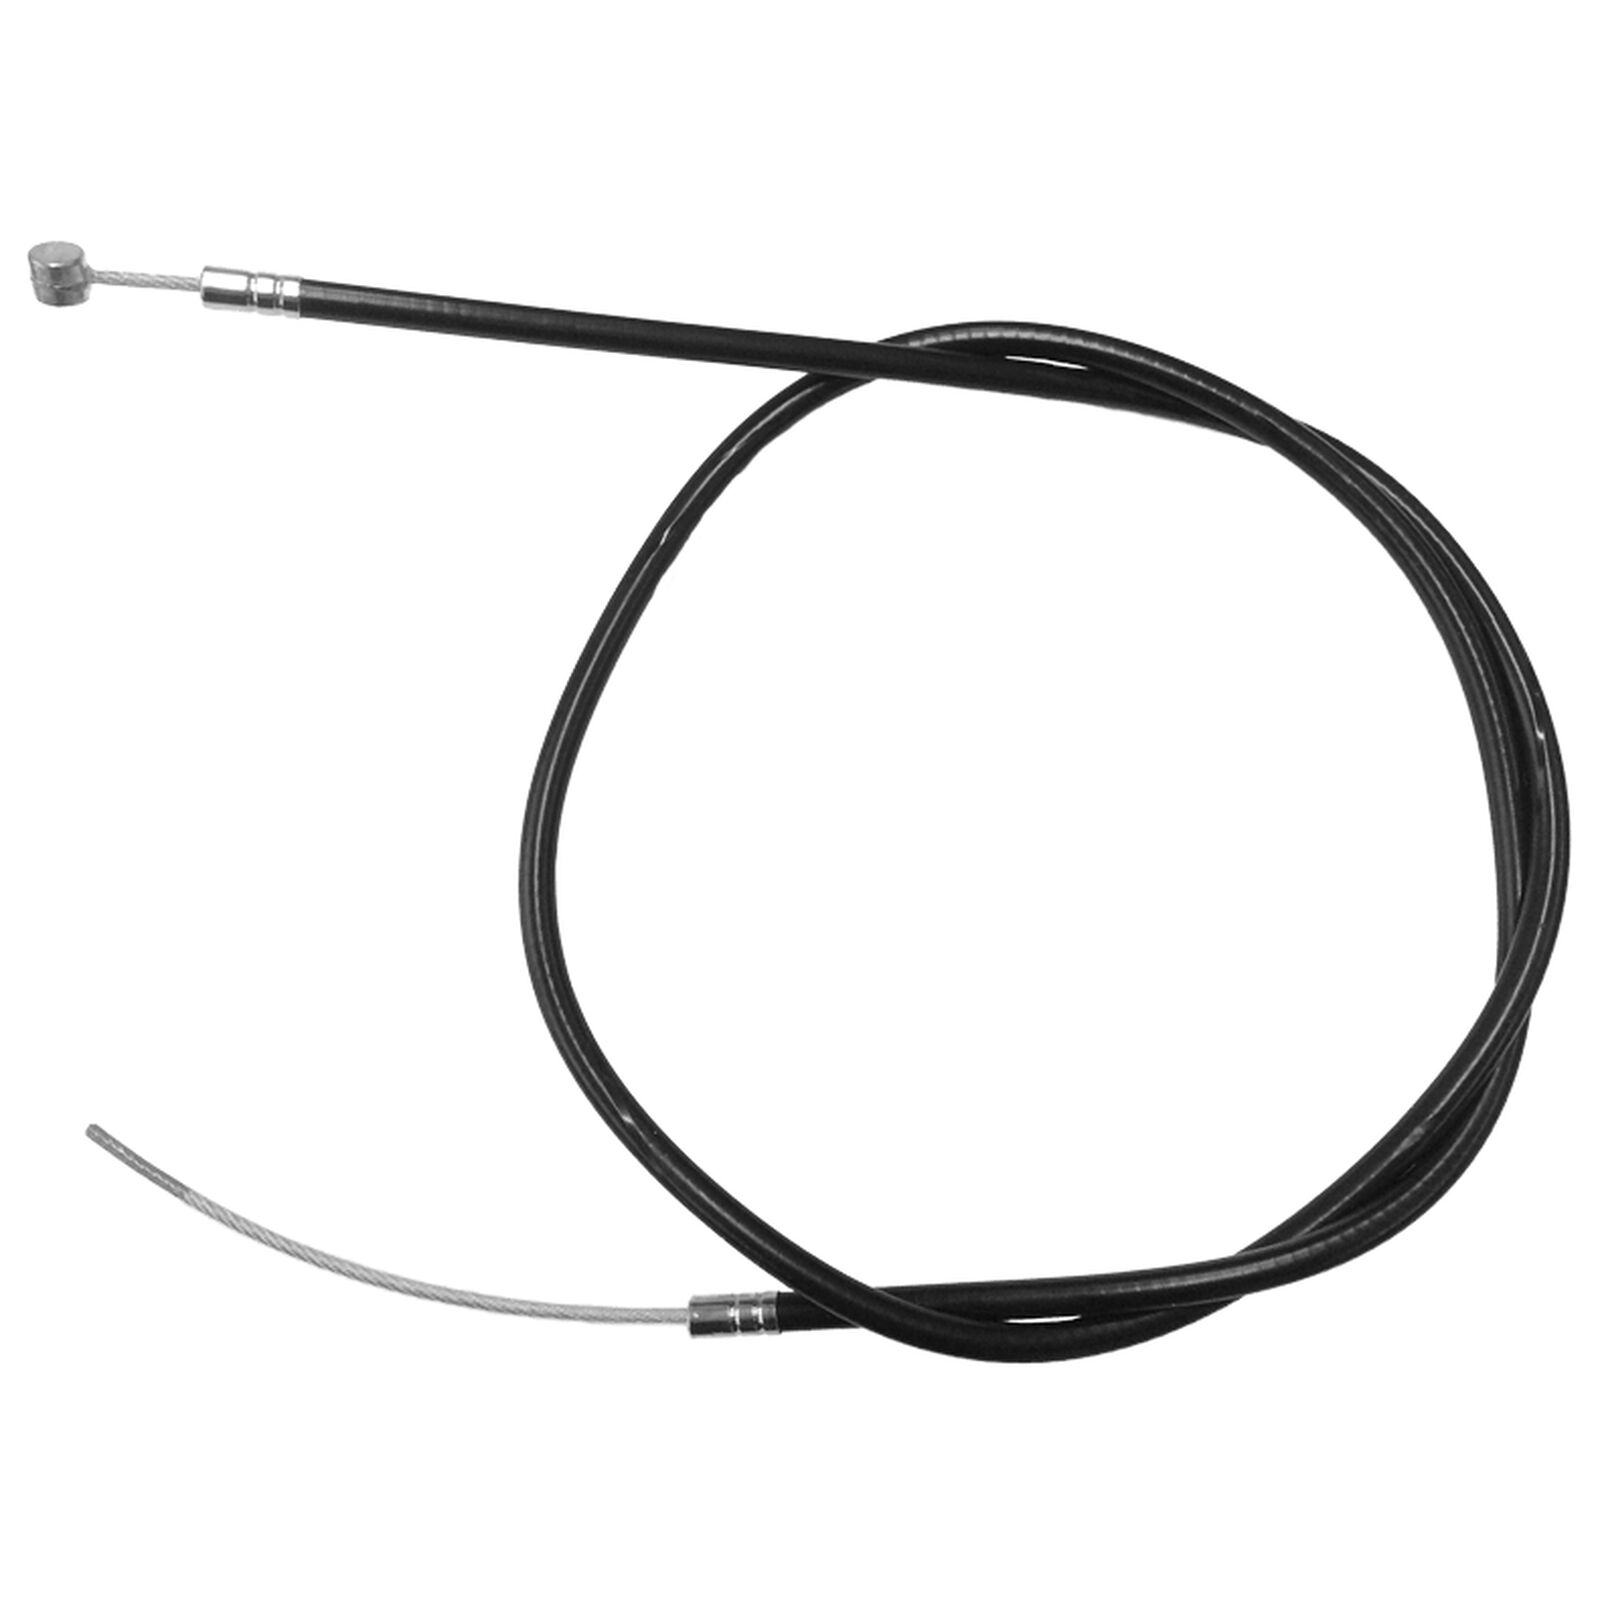 Bugaboo Cameleon brake cable replacement set